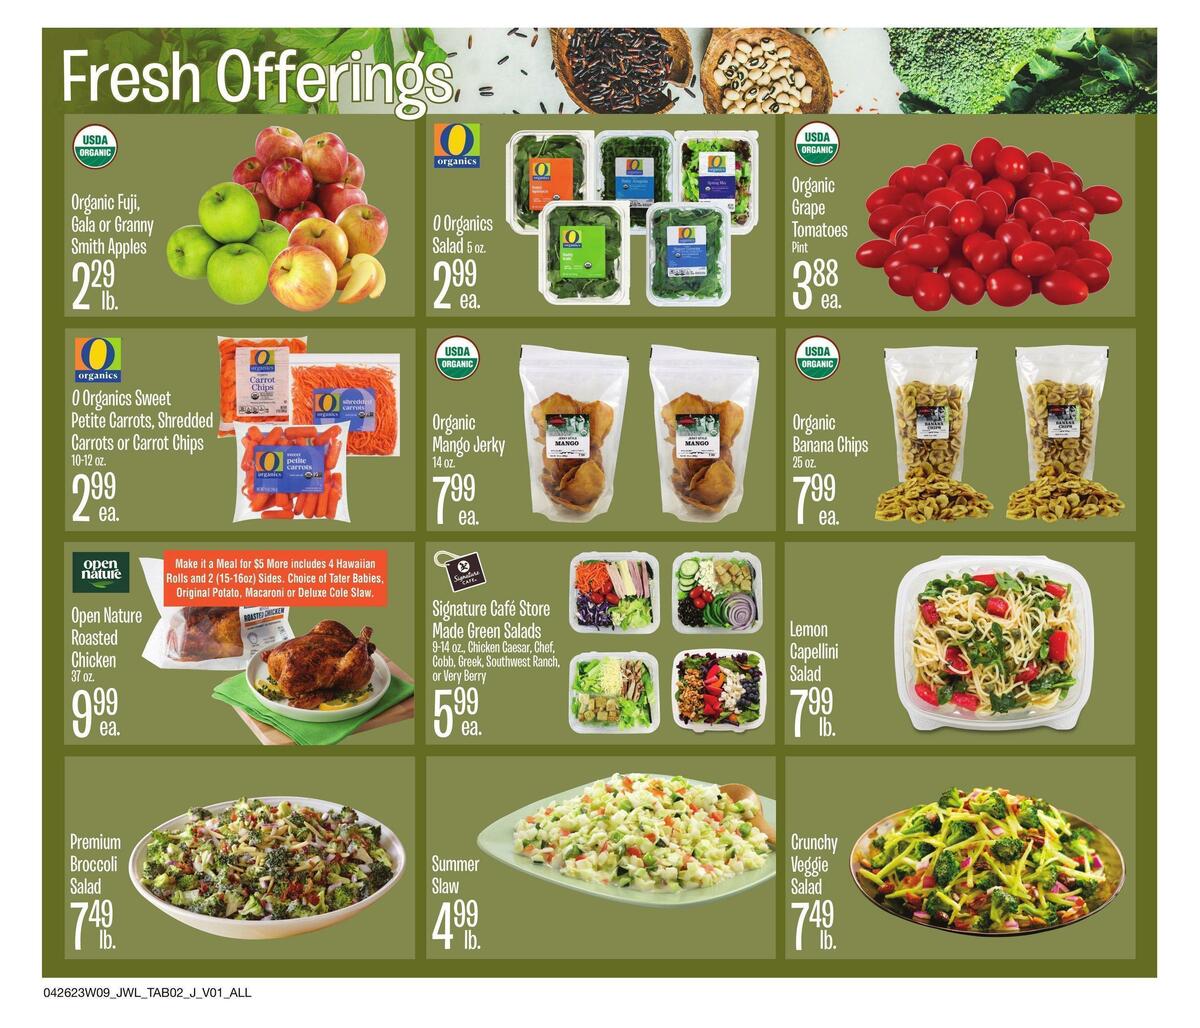 Jewel Osco Natural & Organic Weekly Ad from April 26